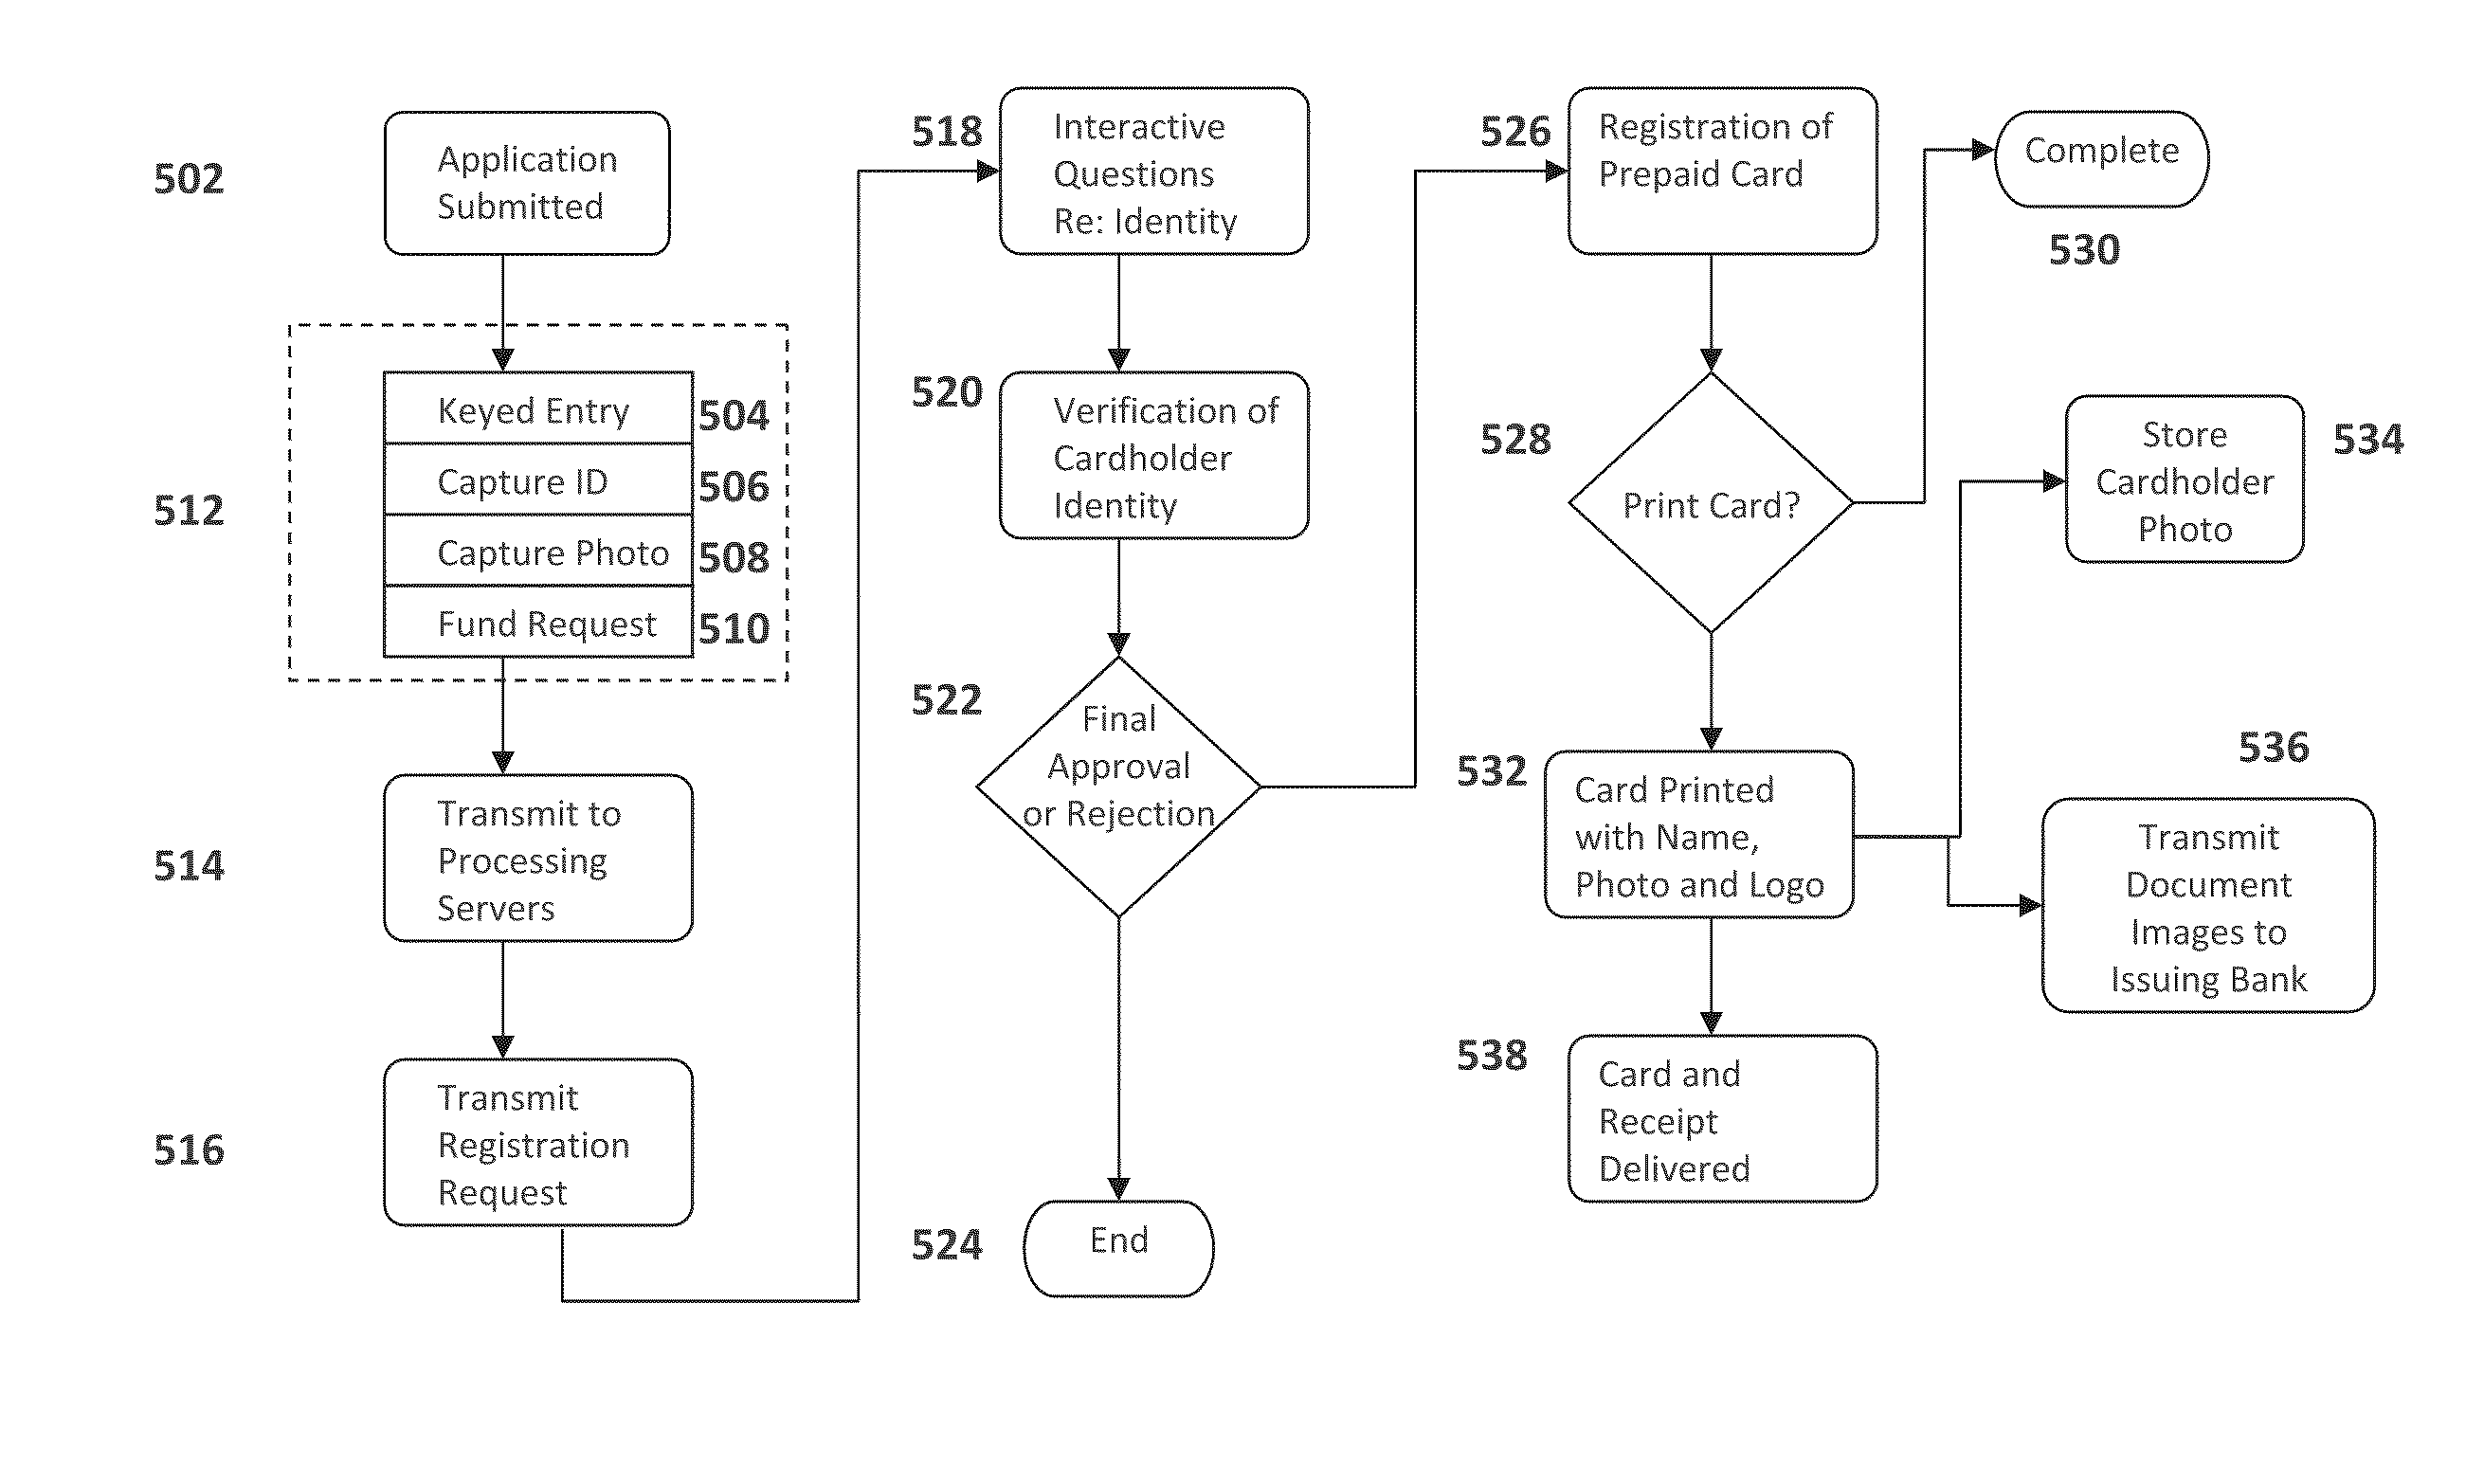 System and method for immediate issuance of an activated prepaid card with improved security measures